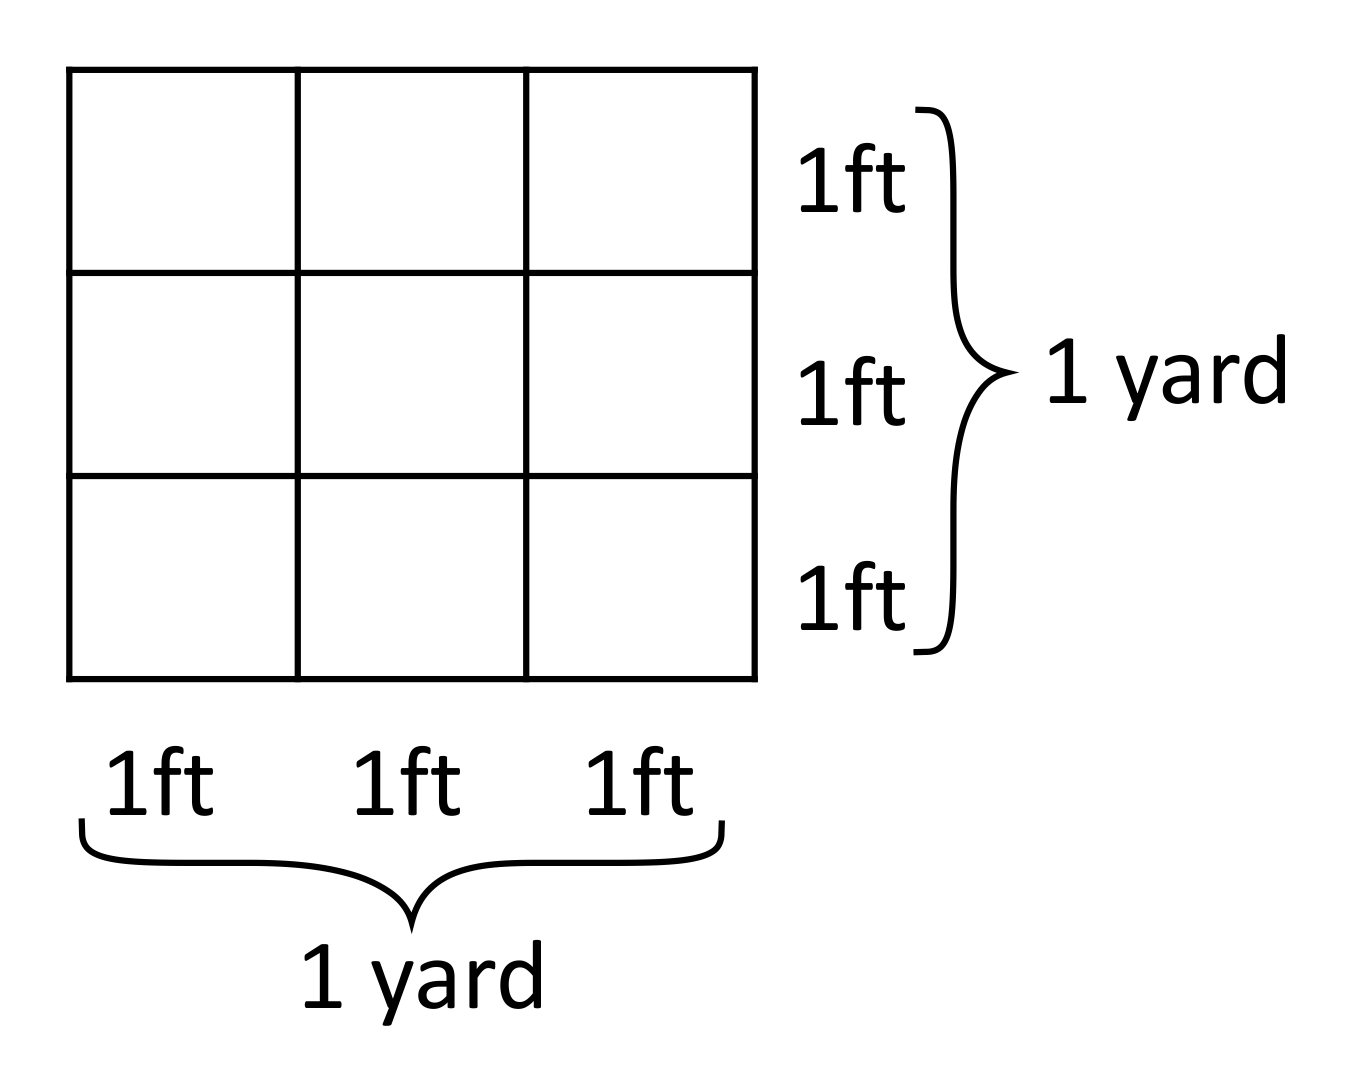 Garden plot showing the conversion of 1 yard by 1 yard to 3 ft by 3ft